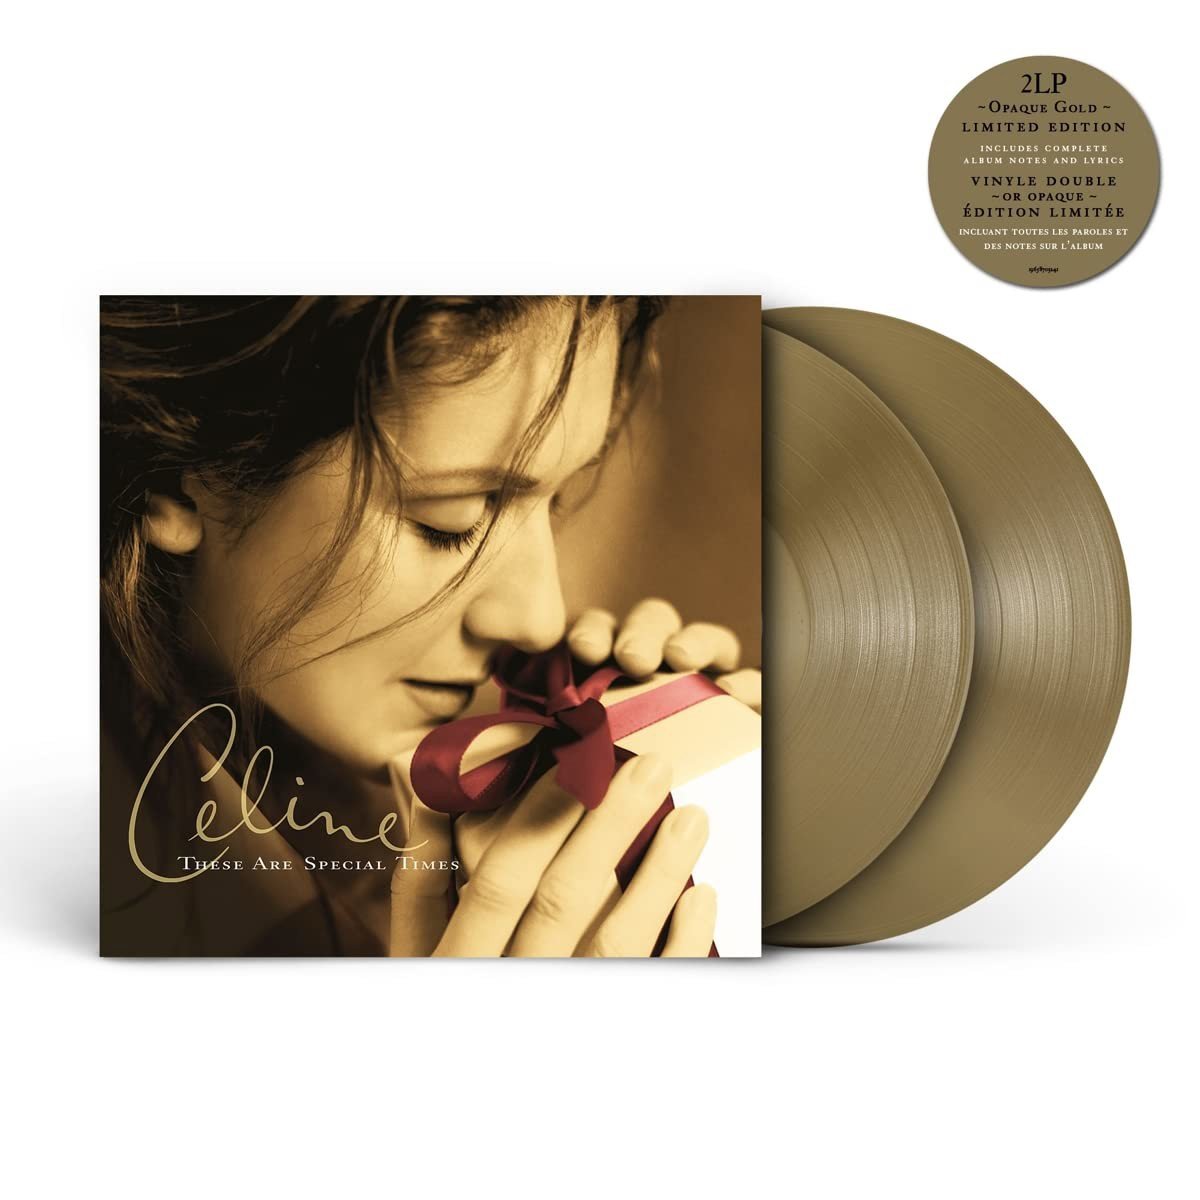 Celine Dion - These Are Special Times (Gold Vinyl) - 2LP (LP)